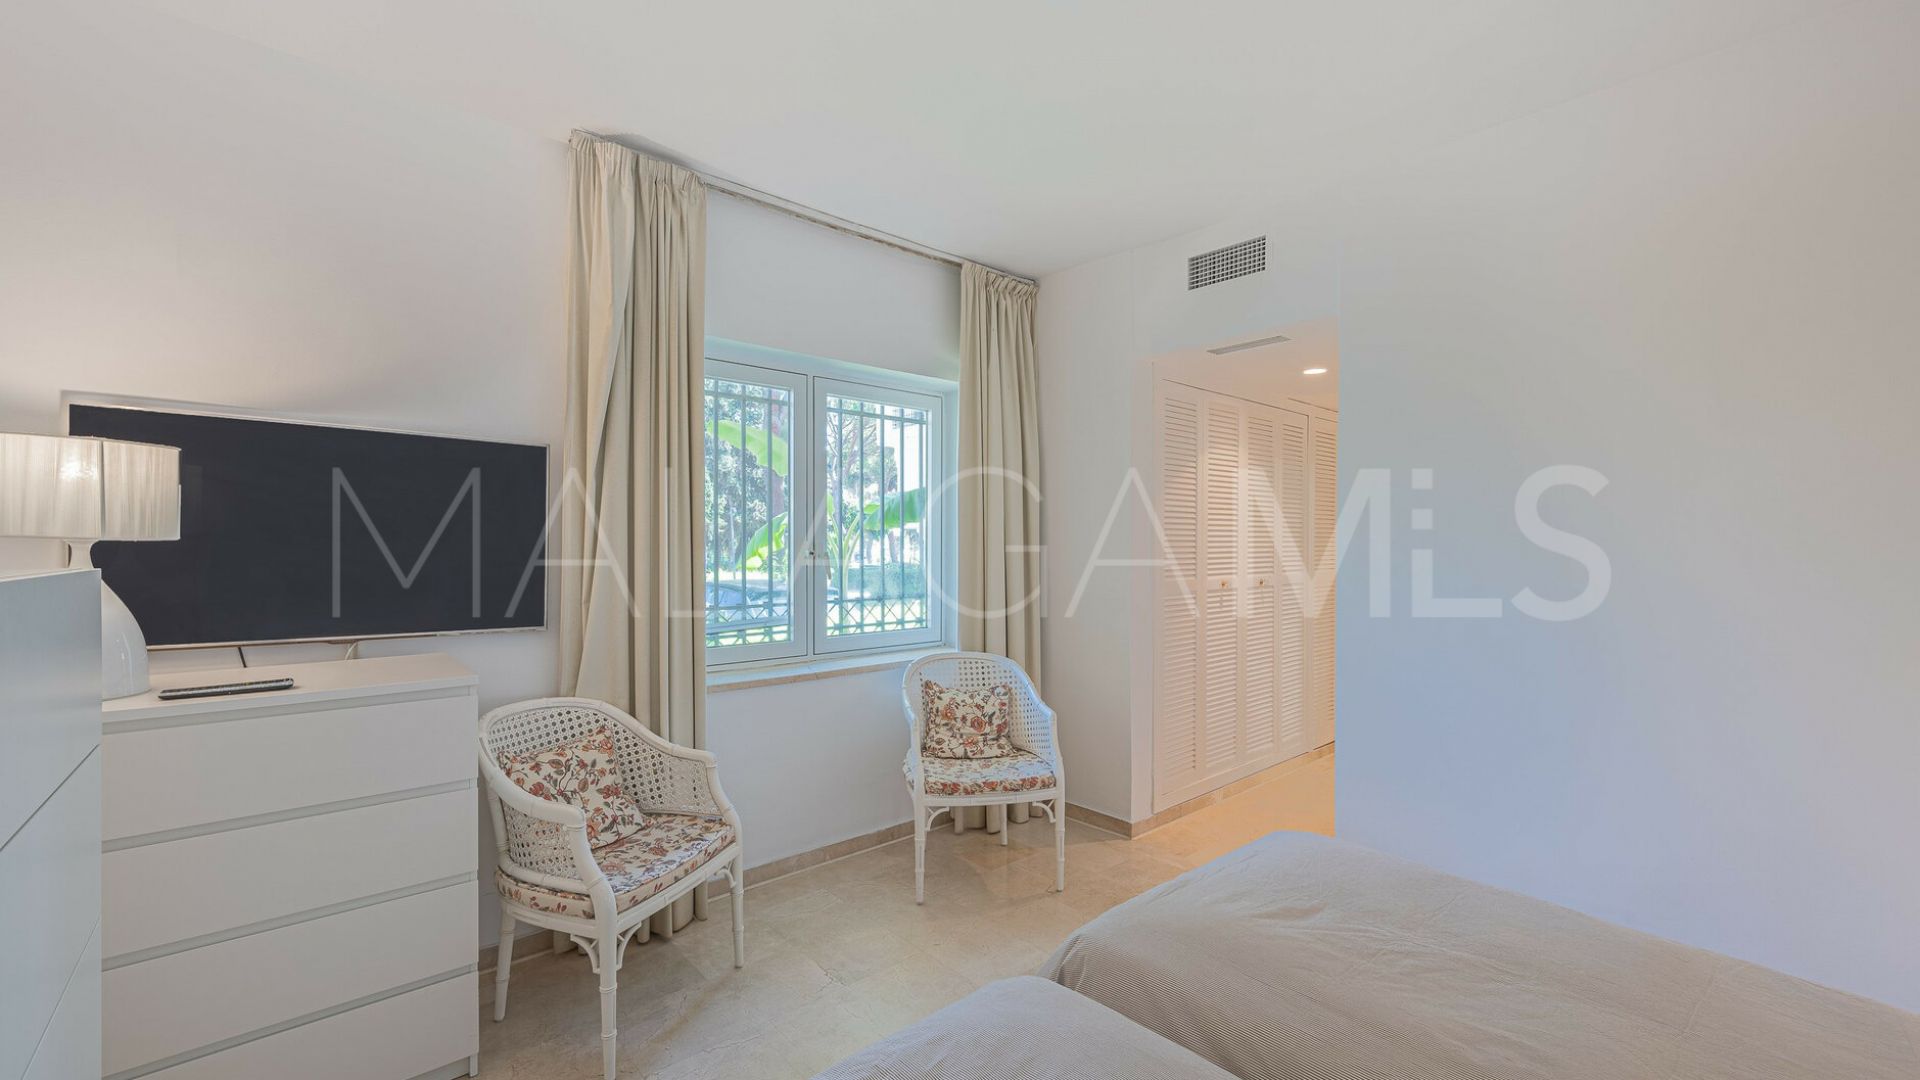 For sale Alhambra del Mar apartment with 1 bedroom